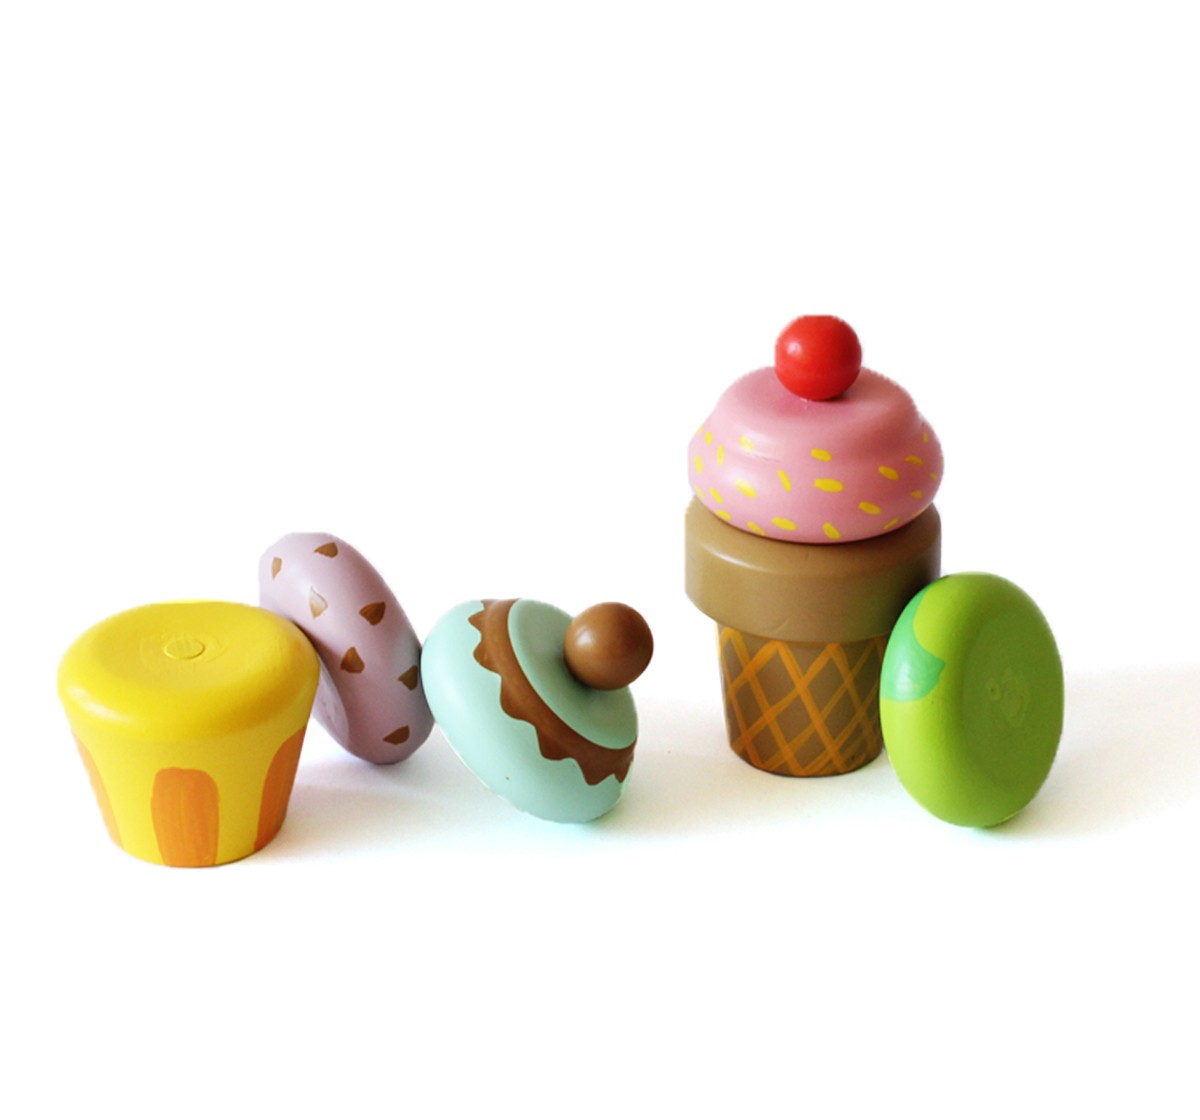 Shumee Ice Cream Magnetic Set Activity Game for kids 3Y+, Multicolour